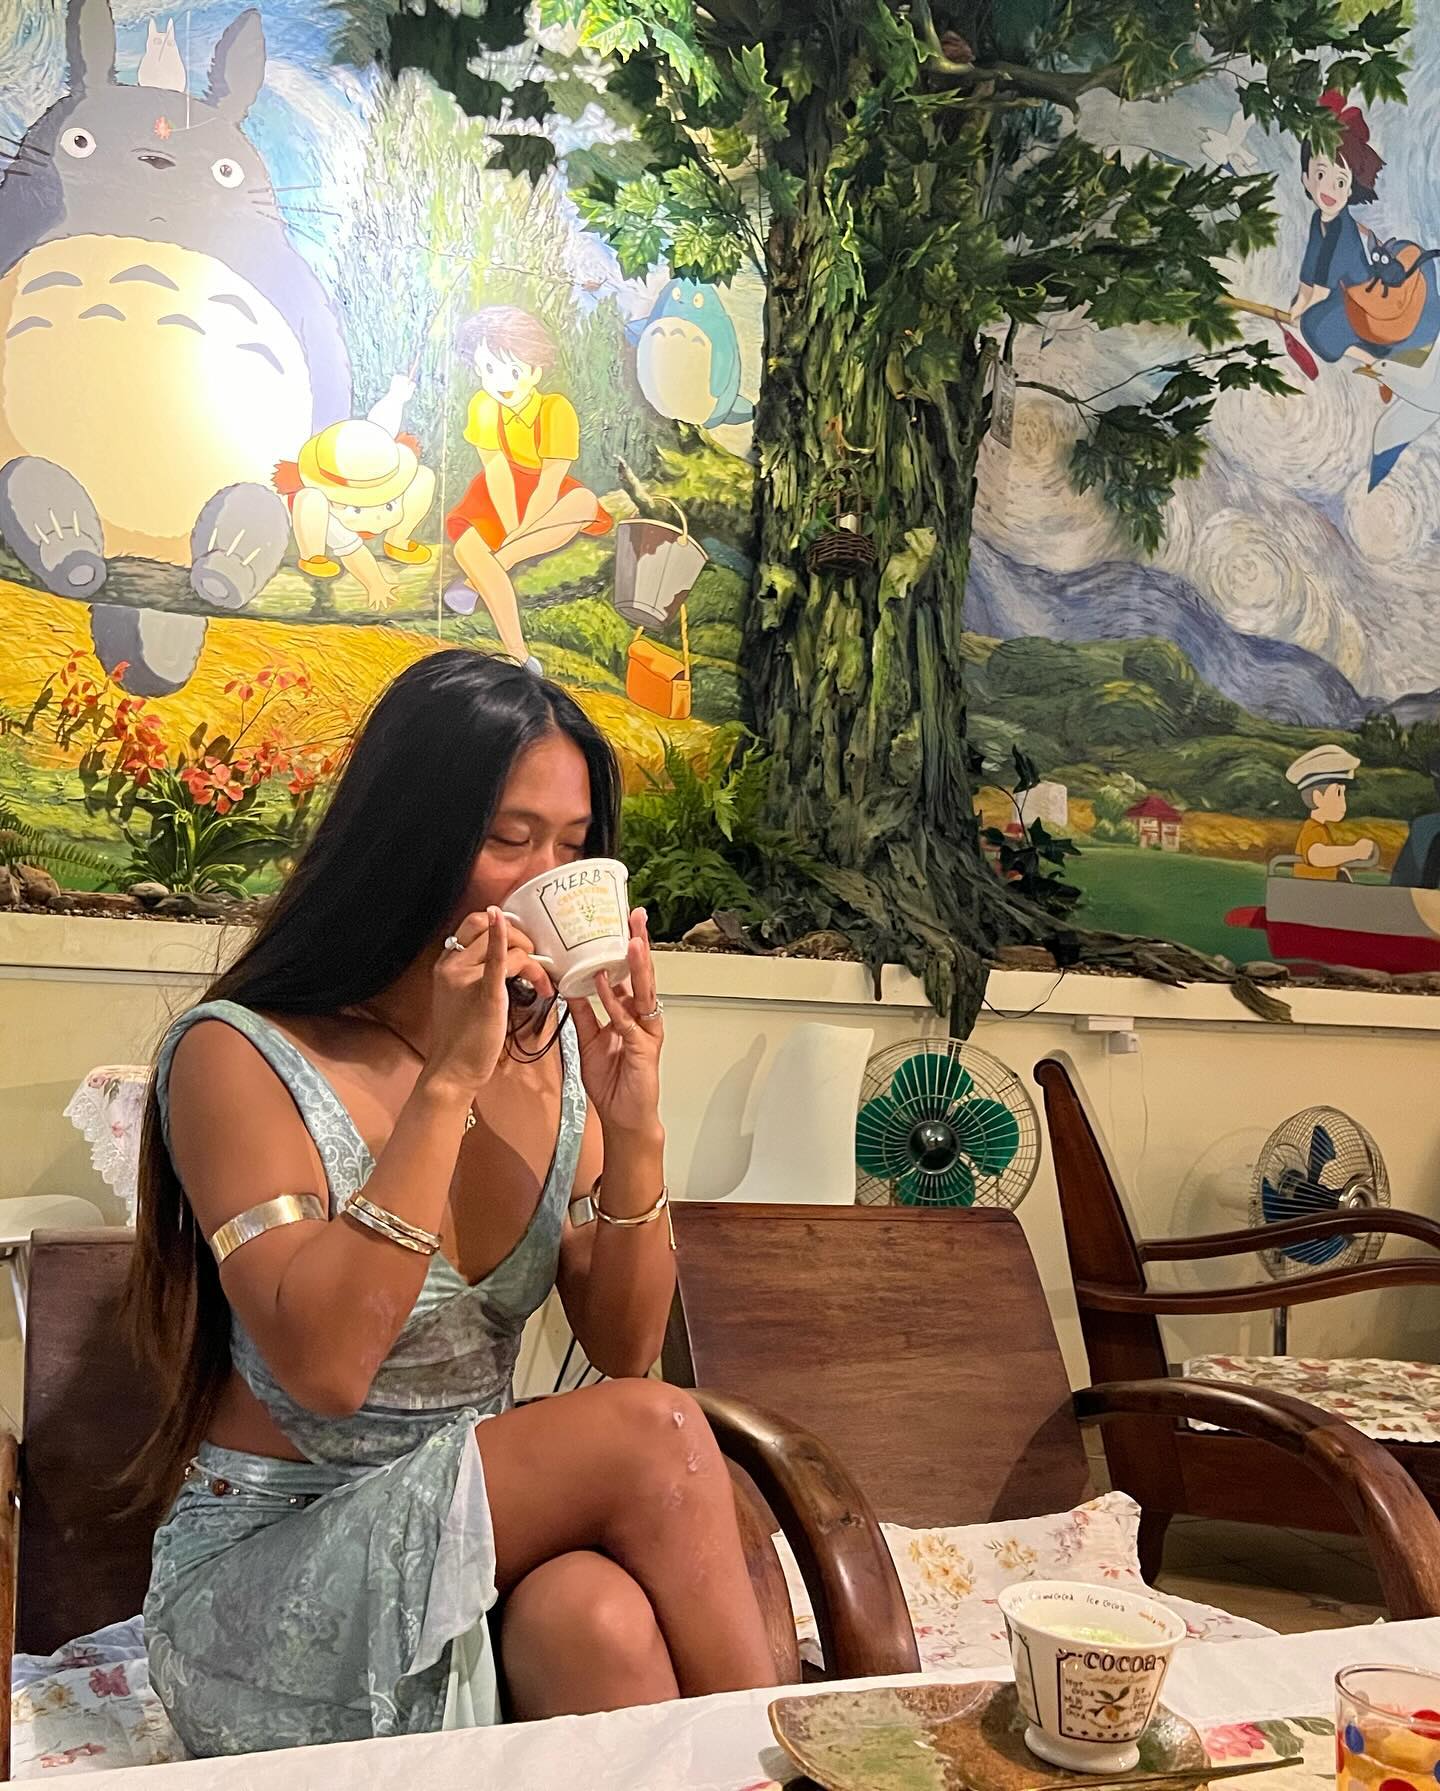 Milk moostache 🥸 and the cutest cafe to read in 💛